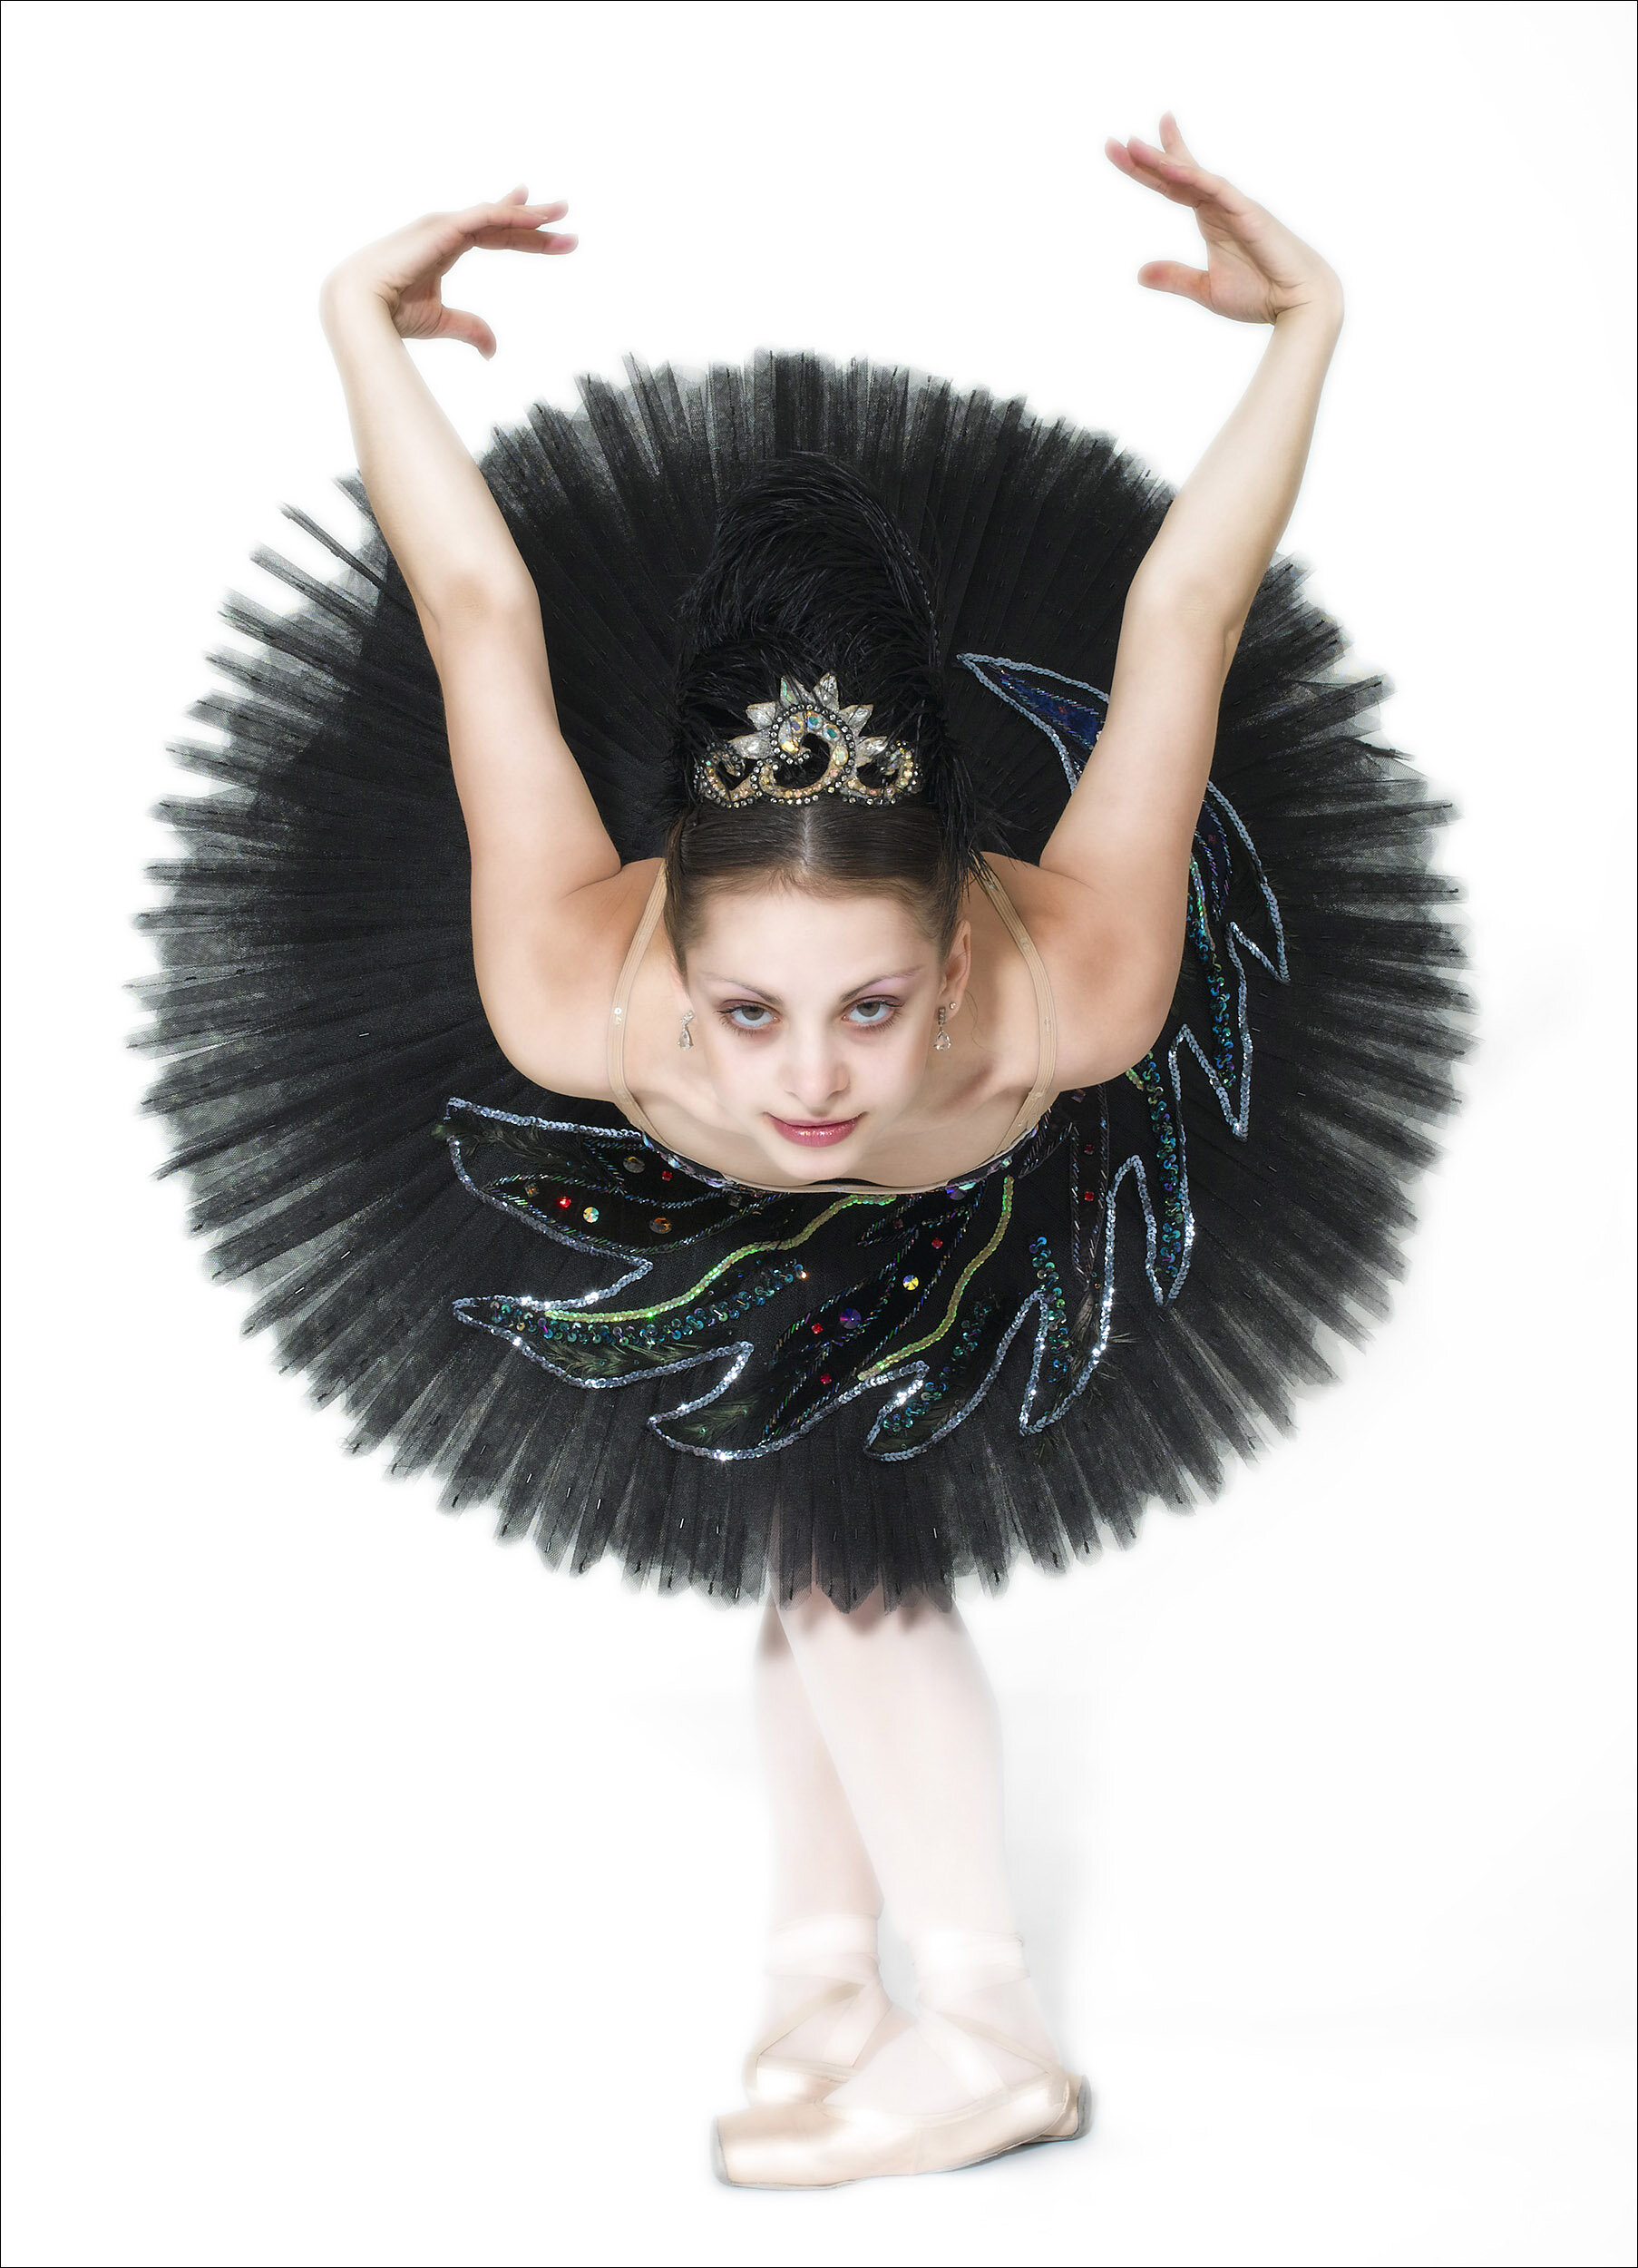 A ballerina from The Black Swan